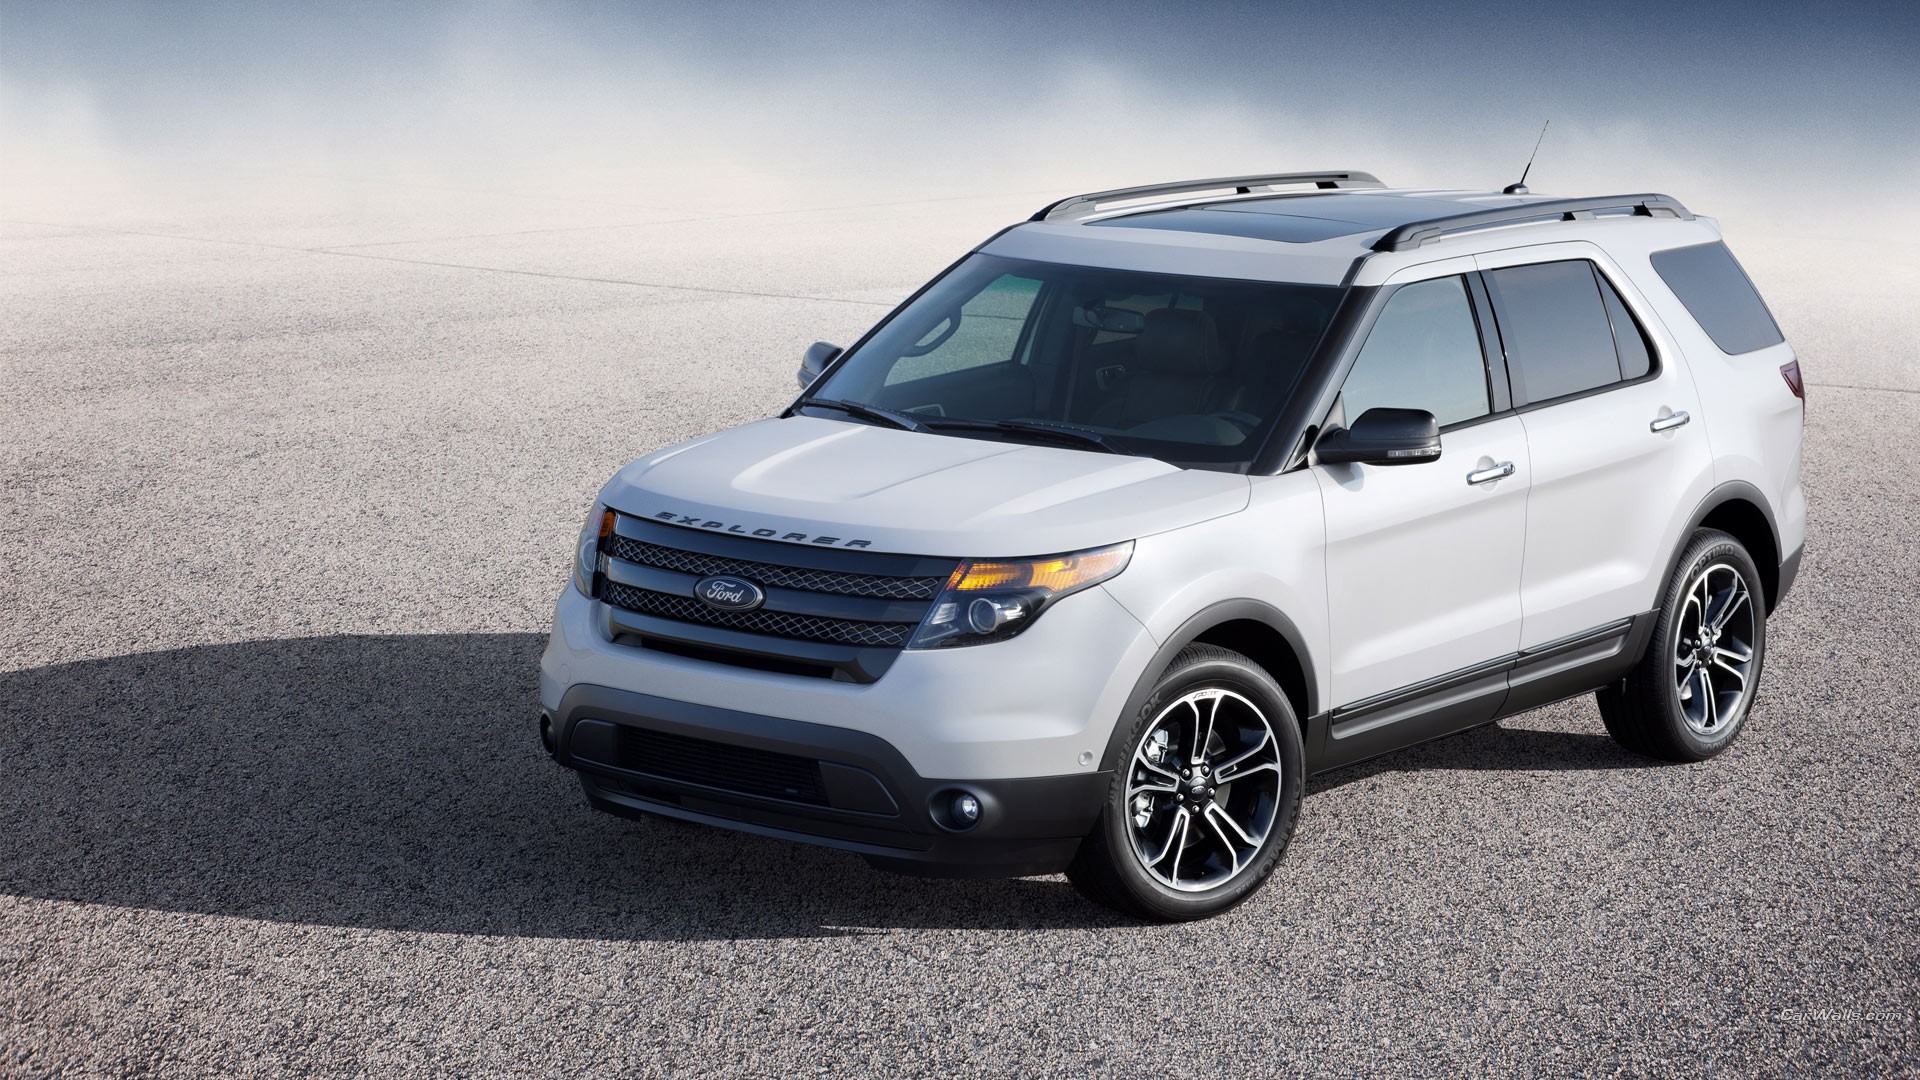 General 1920x1080 Ford Explorer car SUV Ford white cars vehicle American cars